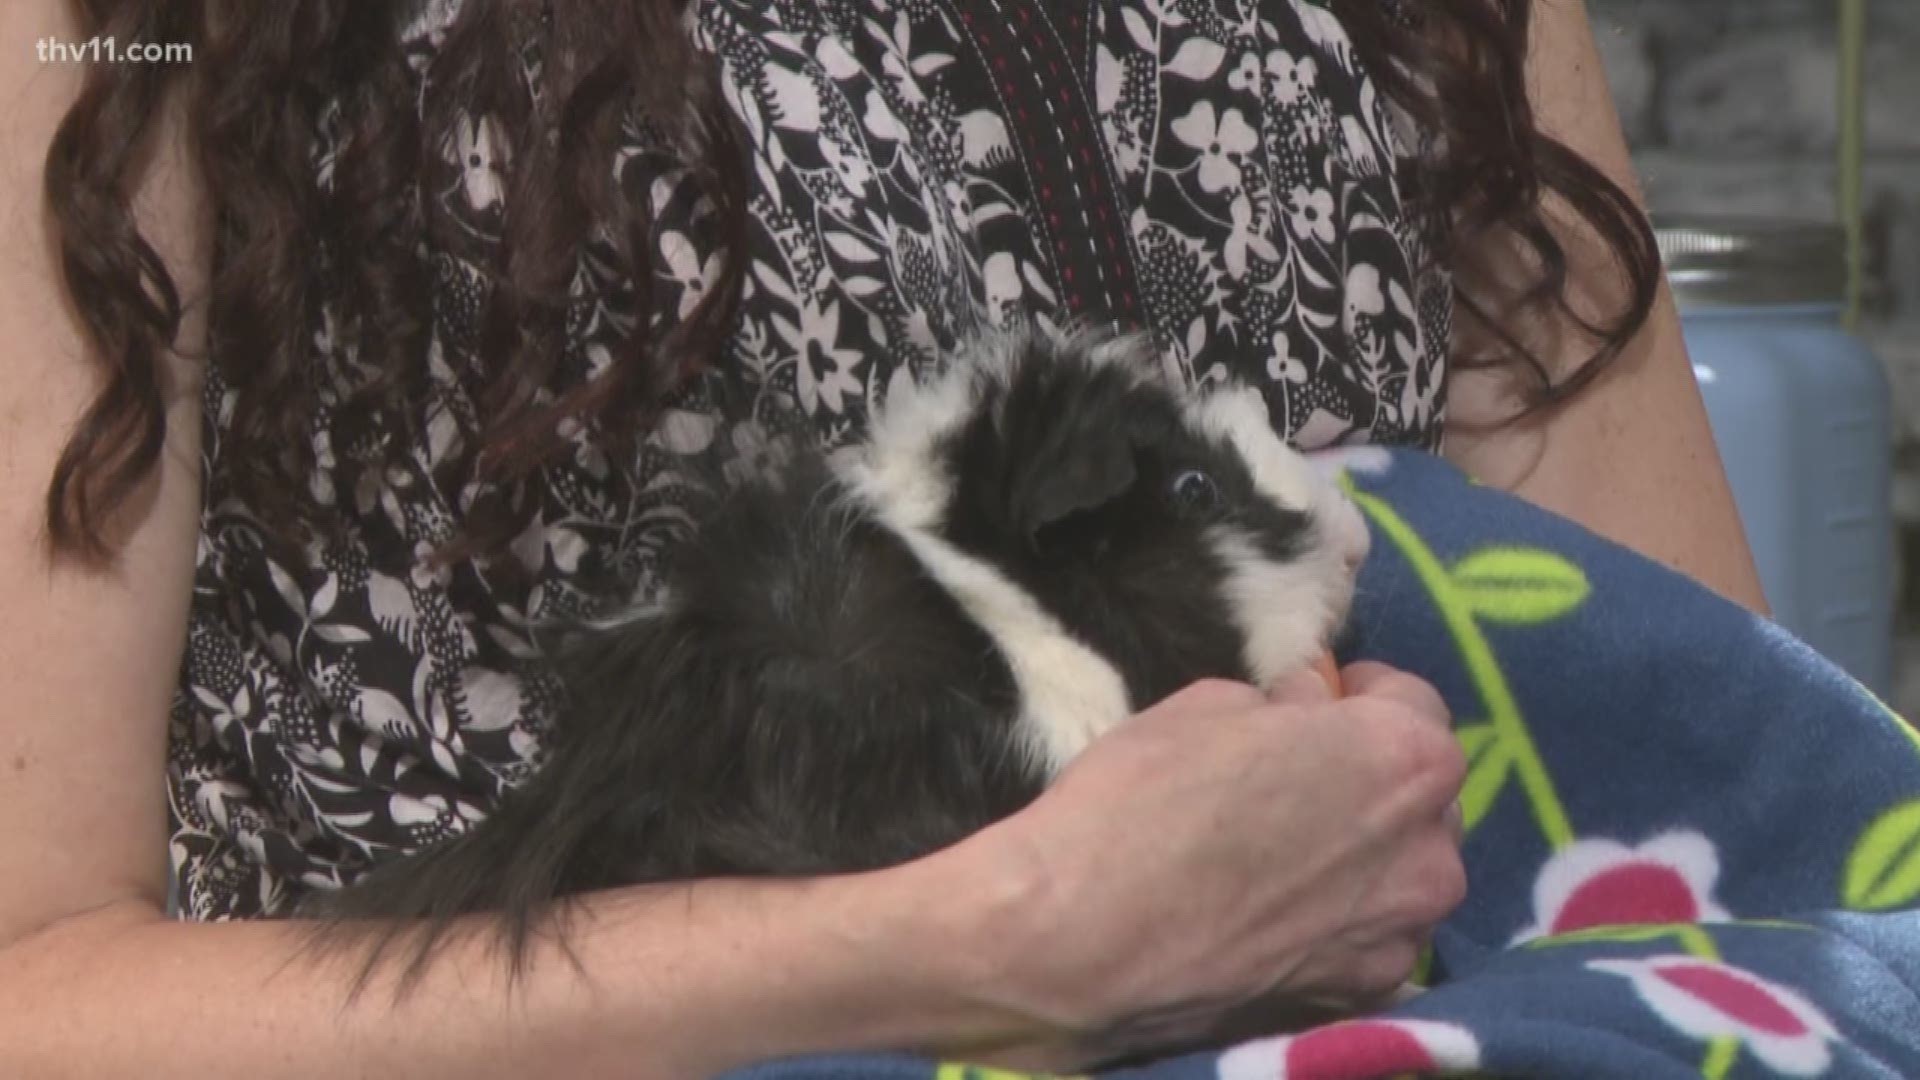 Linda Jones opened up a guinea pig rescue in Central Arkansas and now makes several products for guinea pig owners.